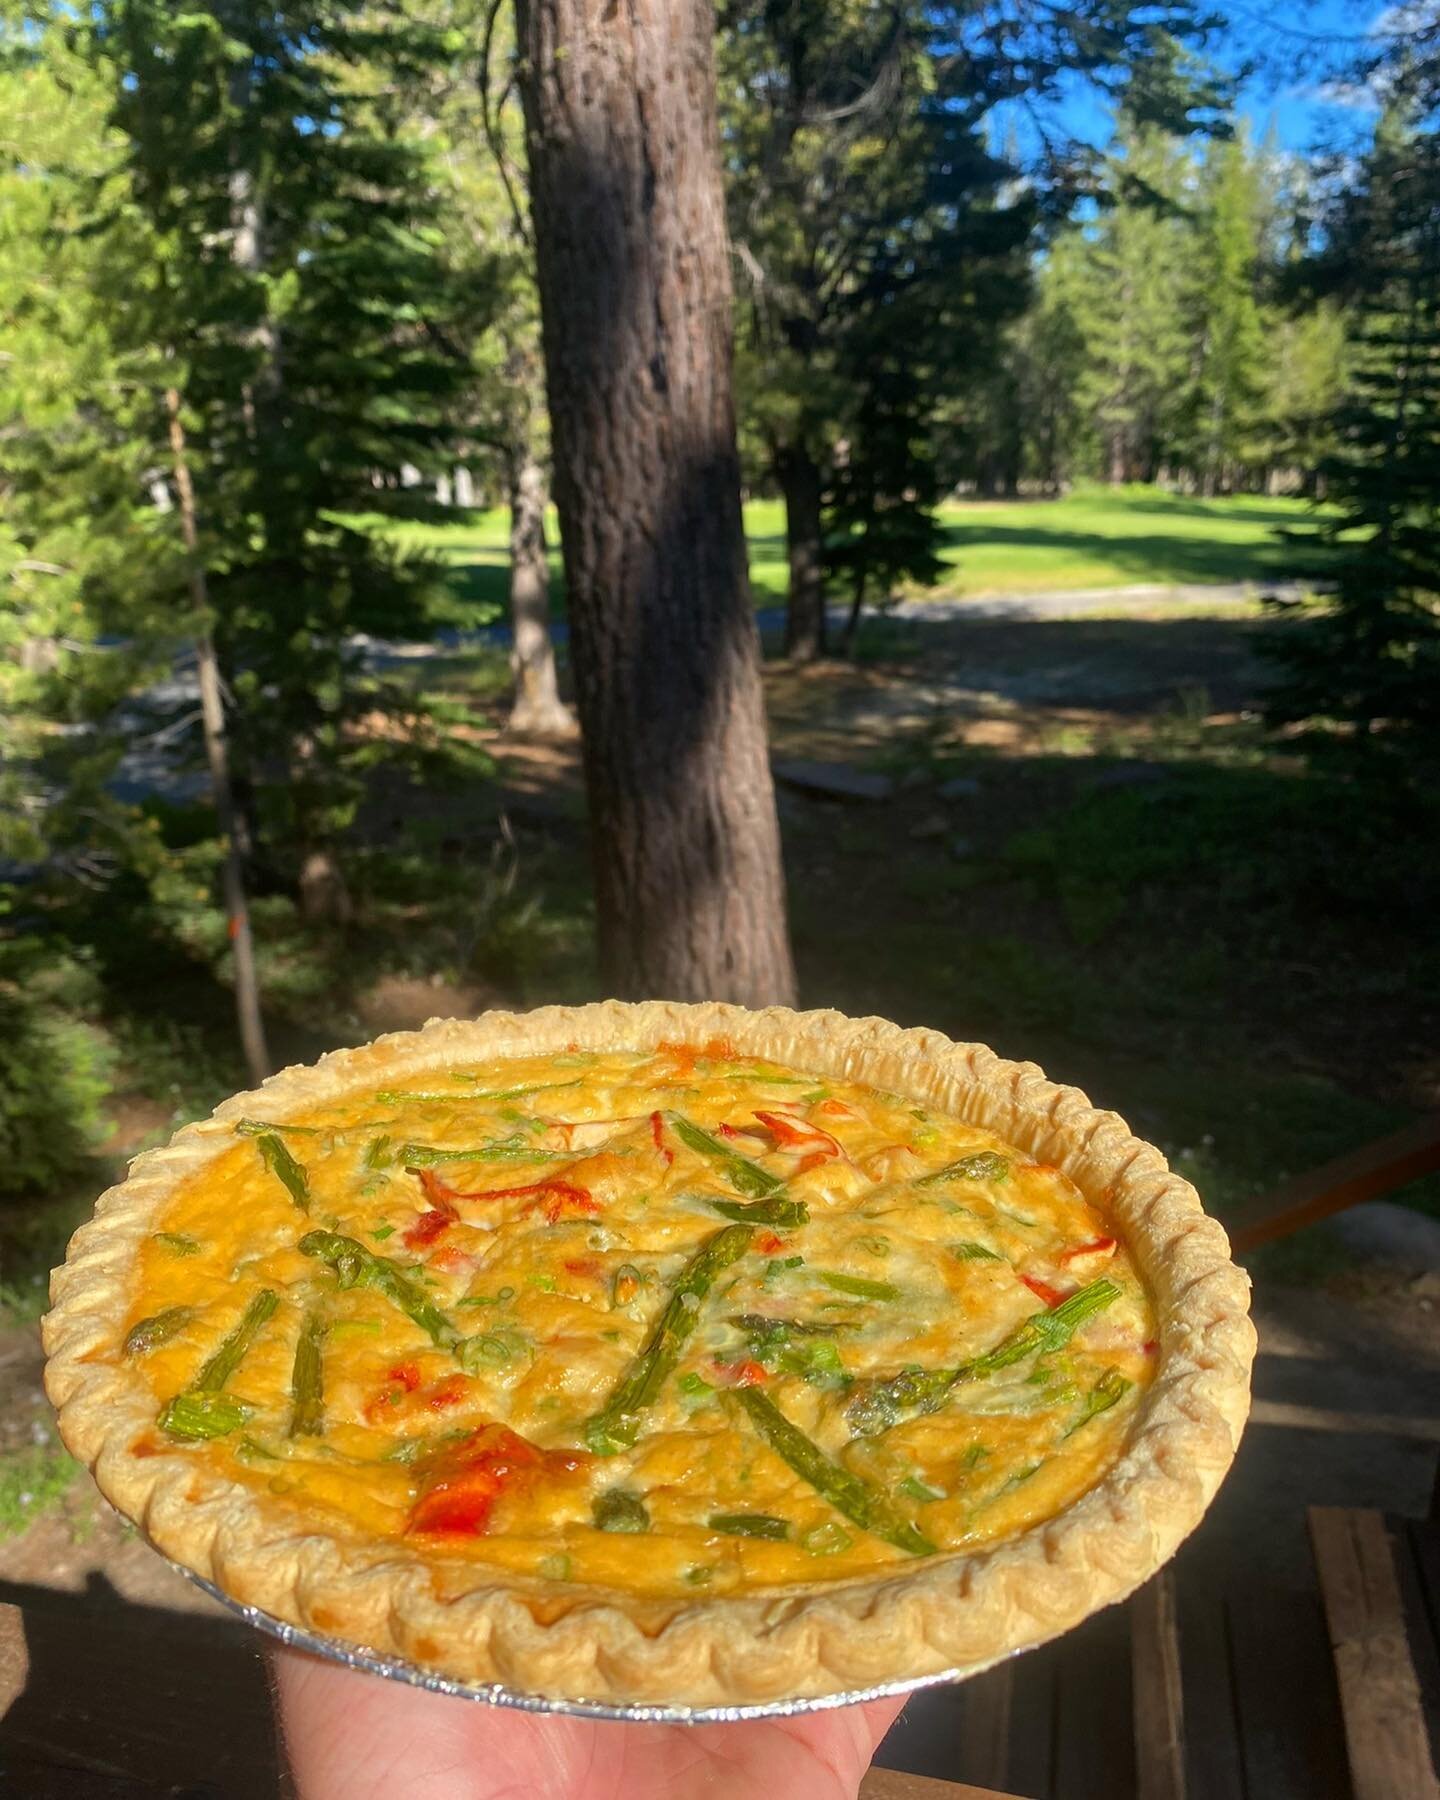 MOTHERS DAY SPECIAL 👩 We are offering lobster asparagus and gruyere quiche 🦞 🥧 for all the awesome moms out there. Place your preorder by Friday at 5pm to guarantee a quiche for your Mother&rsquo;s Day brunch! We will have plenty of awesome produc